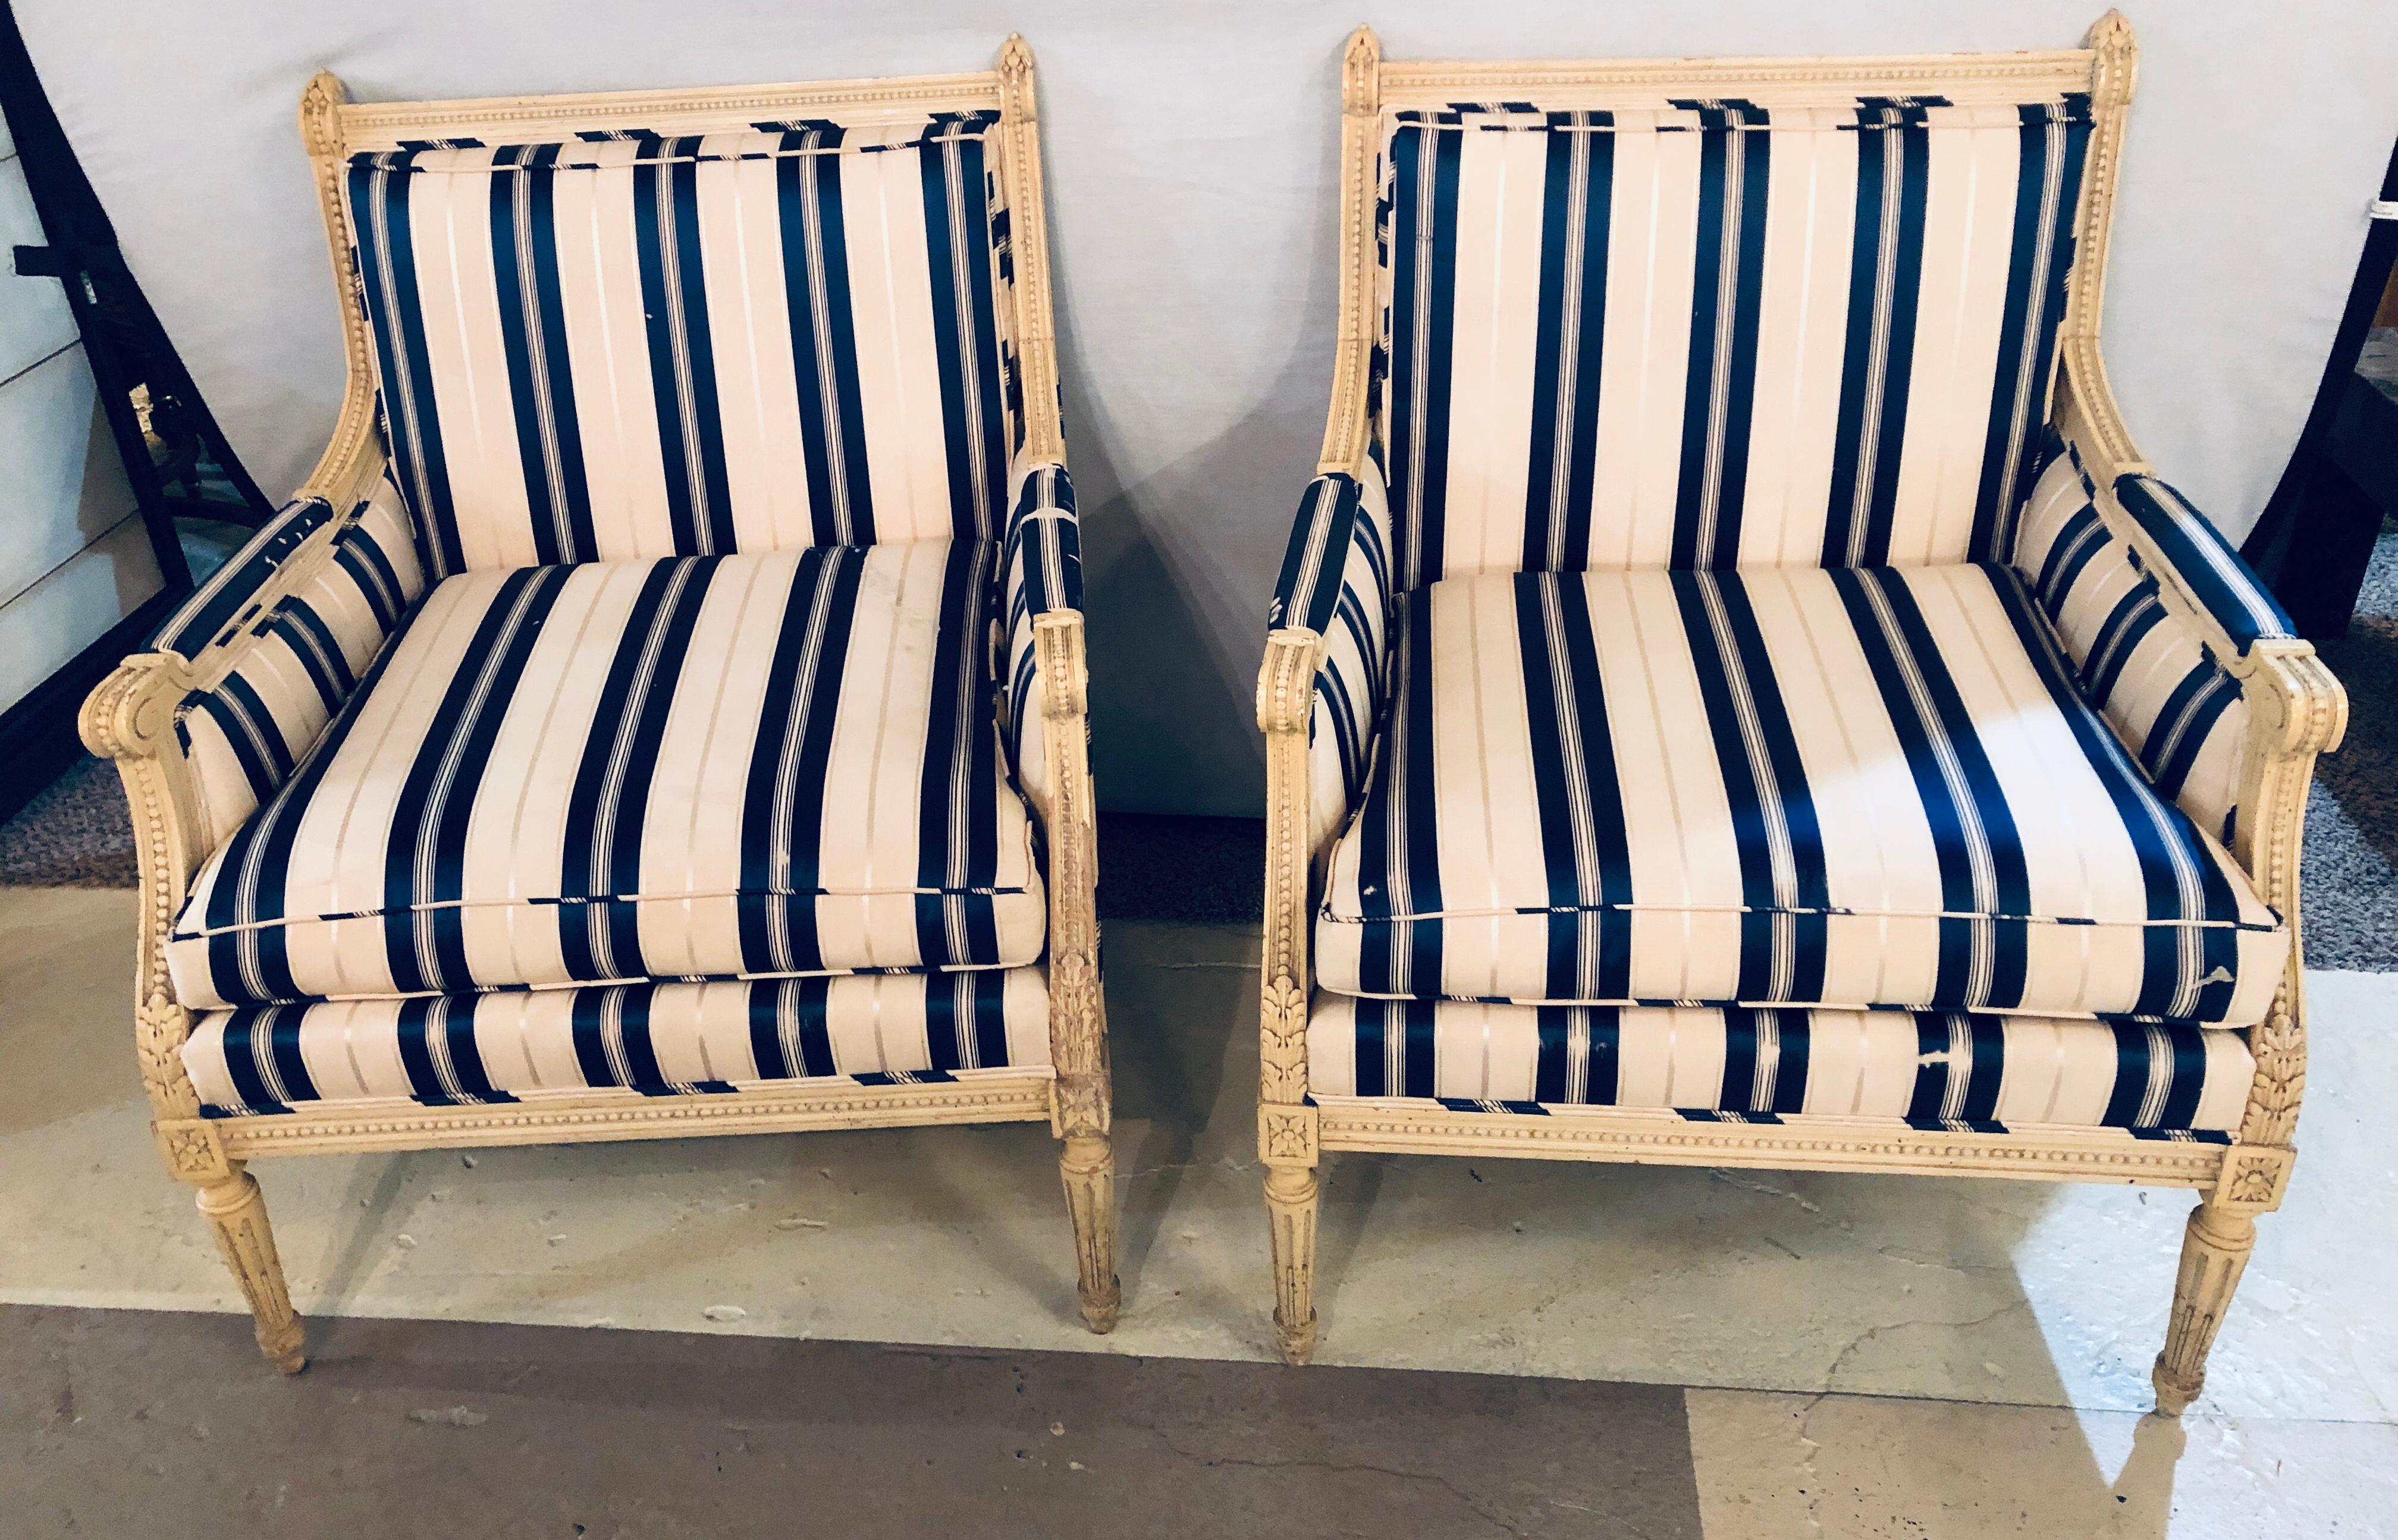 A finely carved pair of Marquis in a Swedish or Hollywood Regency Design. The sleek Louis XVI Style tapering legs supporting a wide and strong case of leaf and ball carvings on the entire frame. Each covered in blue and off white stripped upholstery.